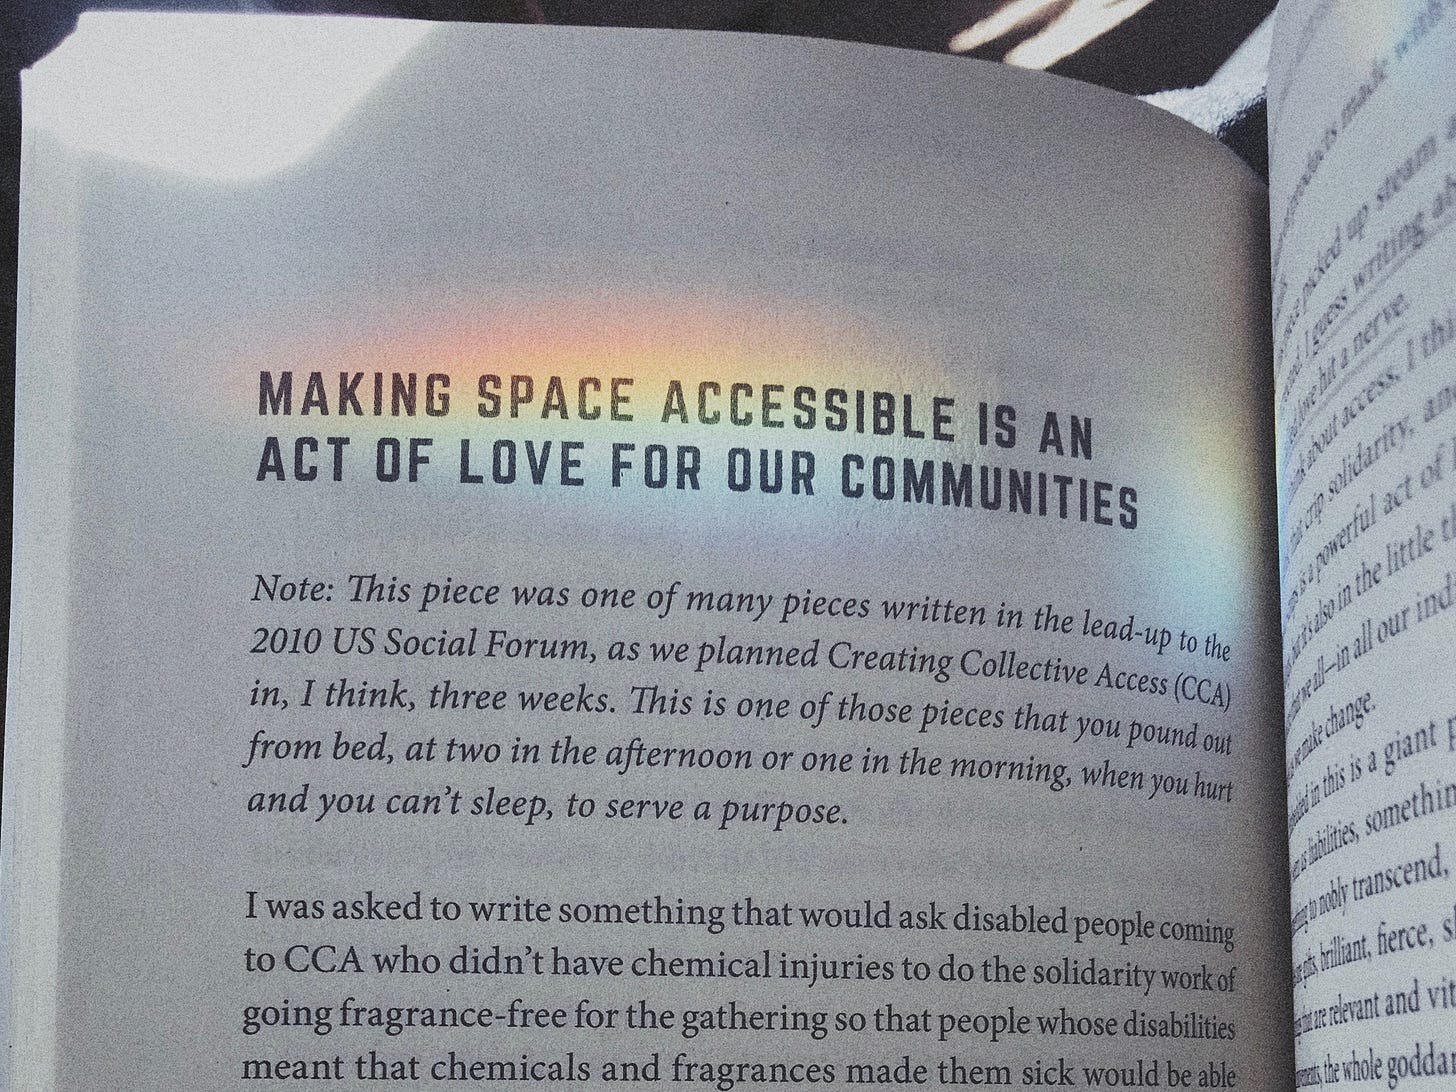 the book is open to a title page of a chapter that reads "Making Space Accessible Is an Act of Love For Our Communities." There is a strip of rainbow-colored light across the text.